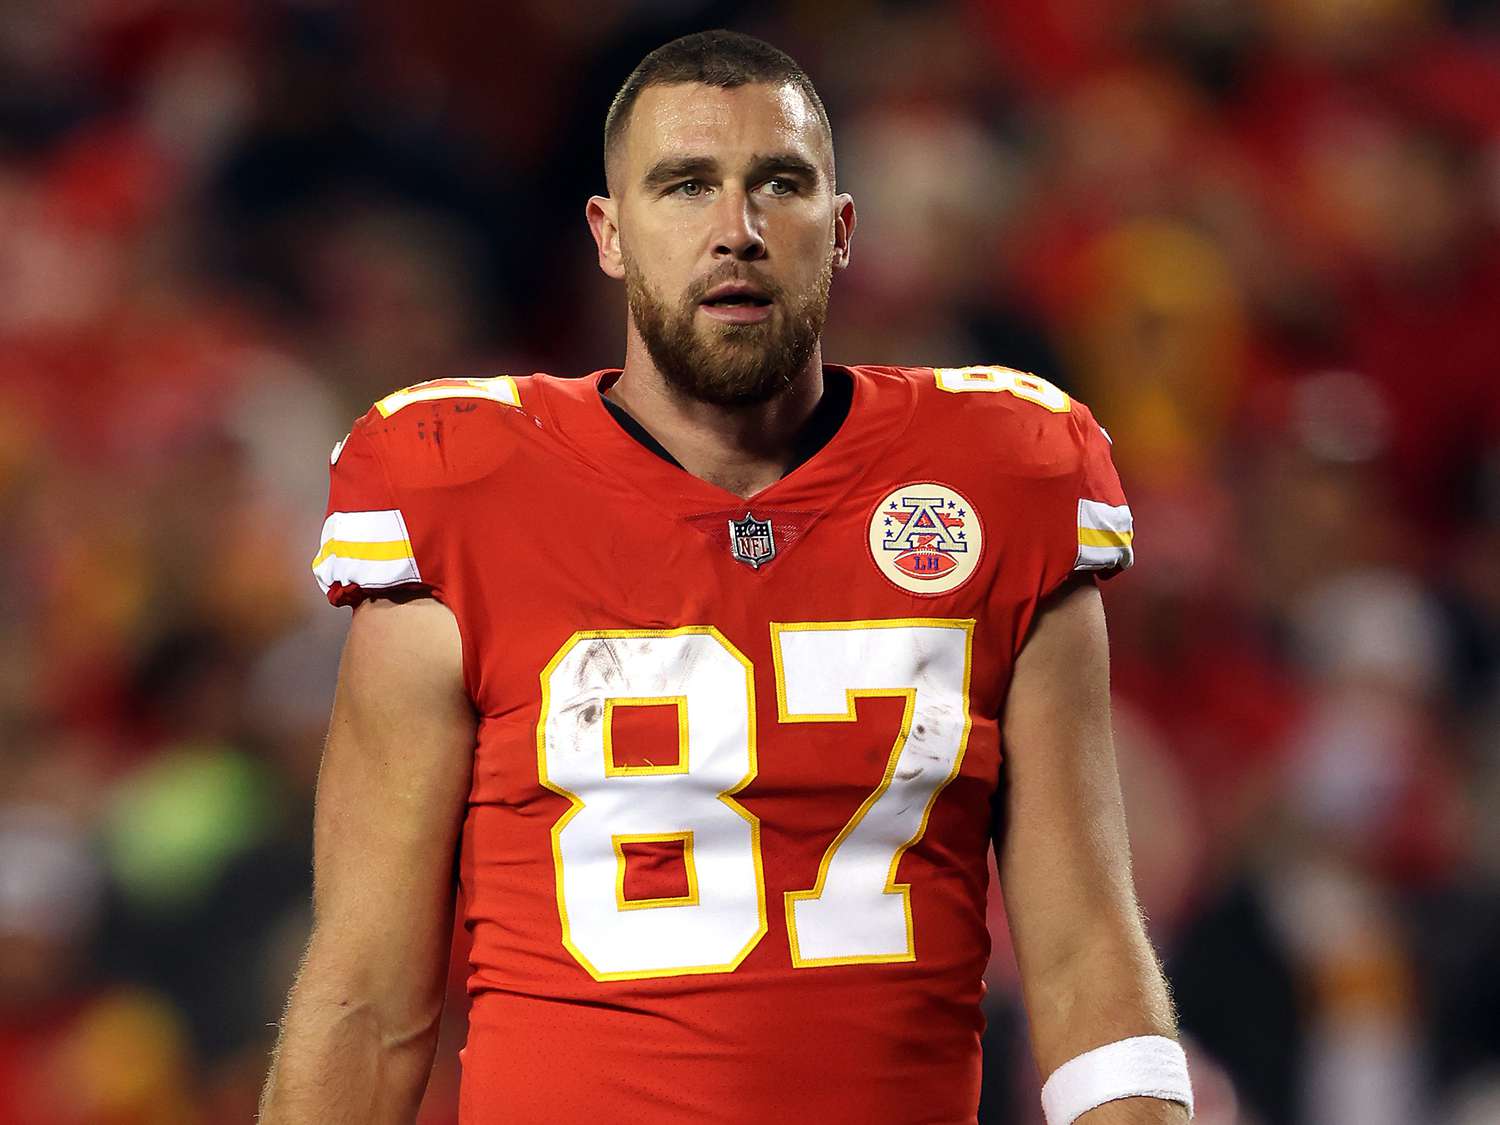 Kansas City Chiefs TE Travis Kelce 11,000 receiving yards becoming franchise’s all-time leader